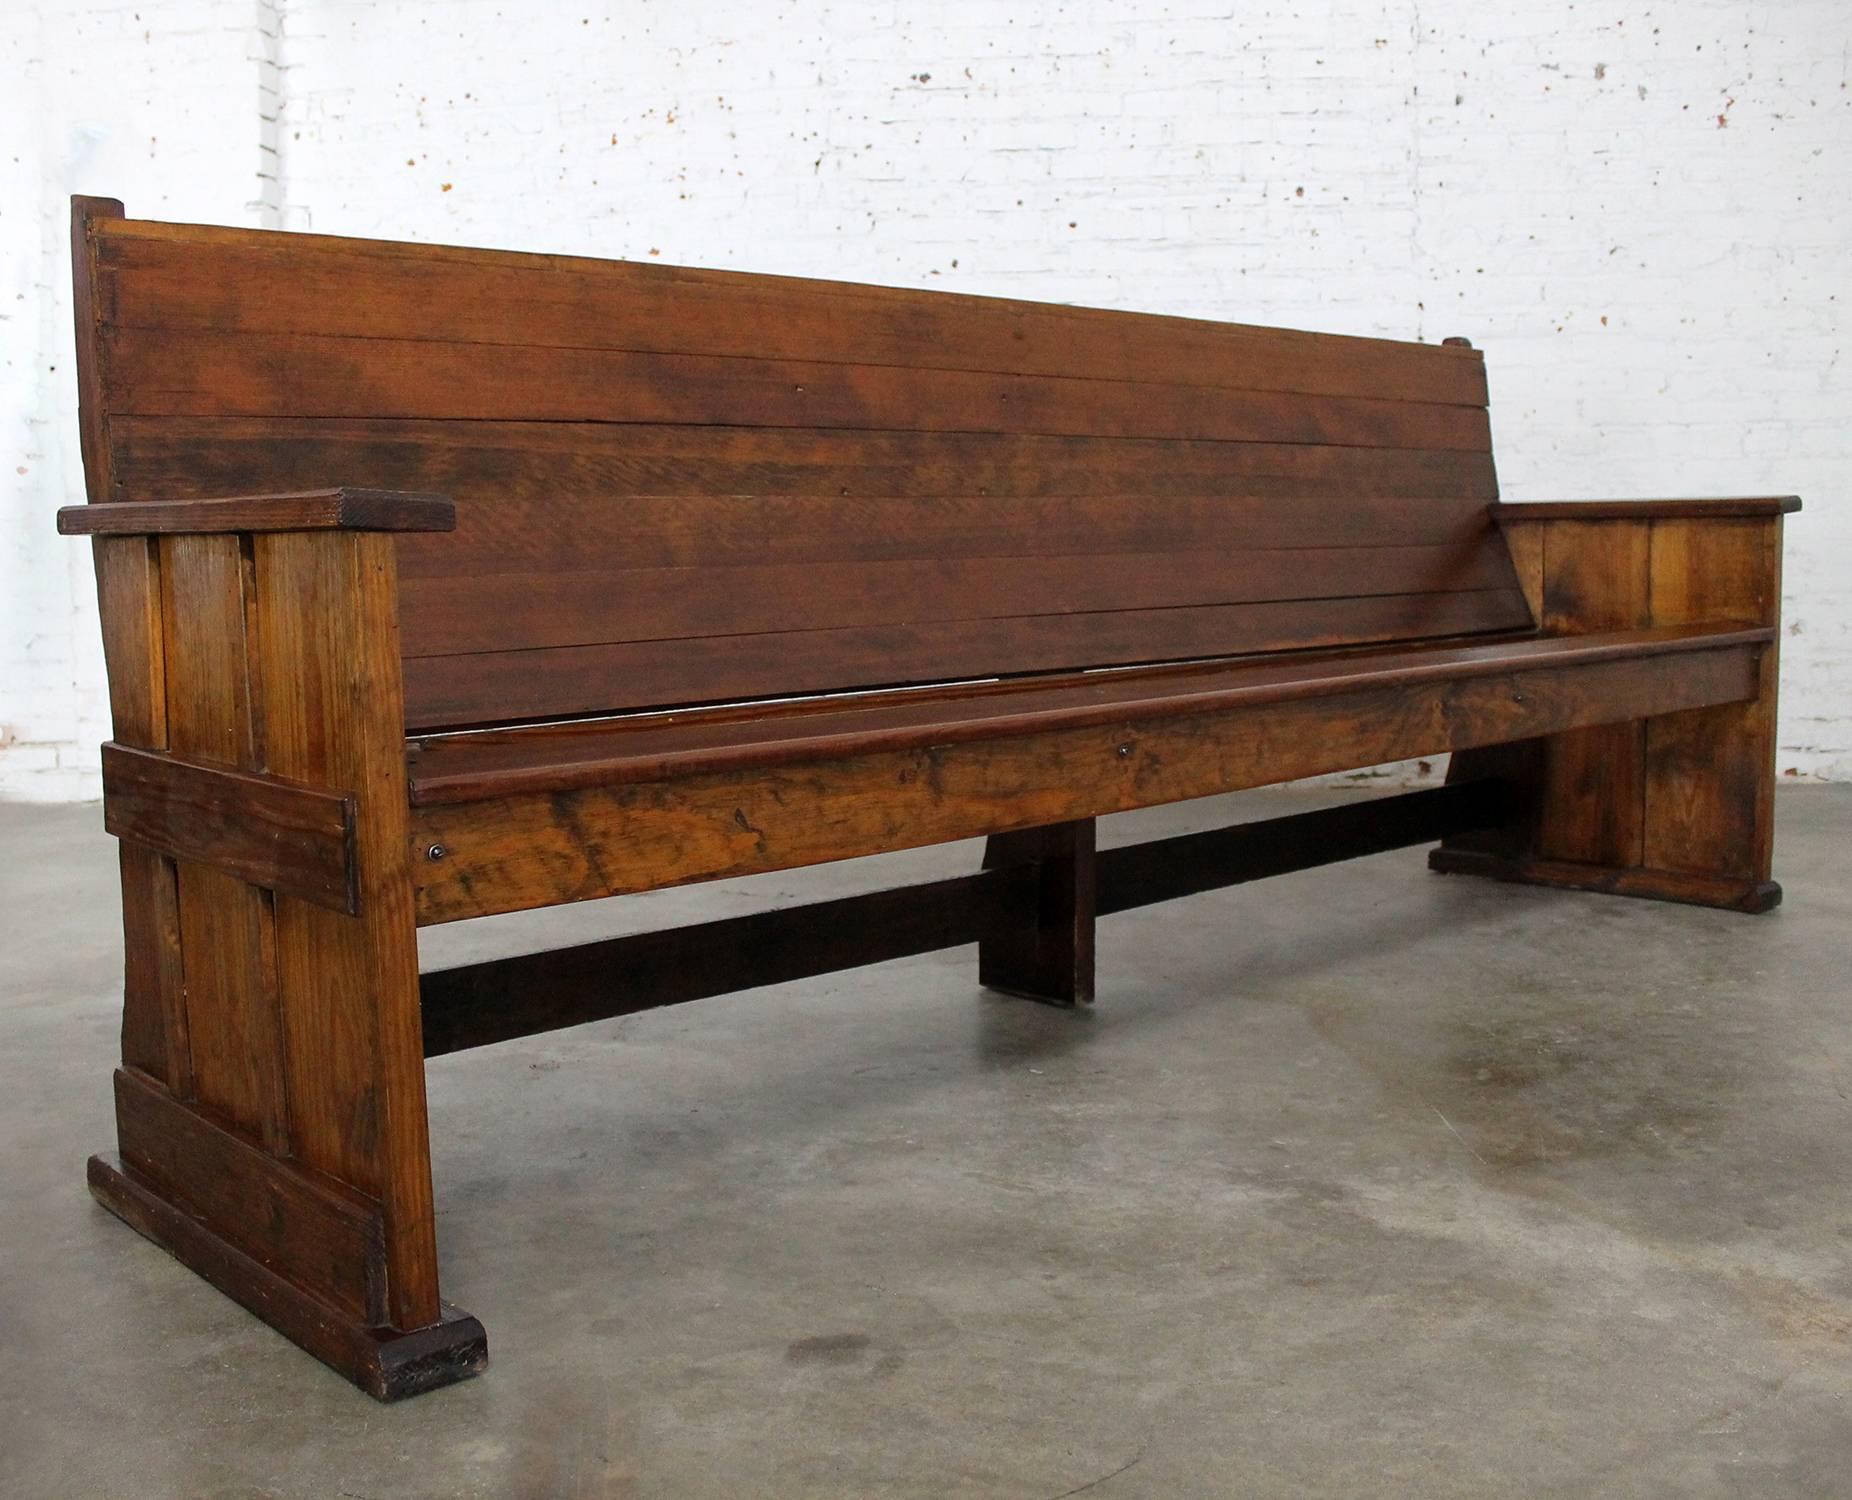 Gorgeous rustic pine 19th century bench or pew. This fabulous antique piece is in wonderful condition with loads of beautiful patina.

This bench is outstanding! The antique pine is phenomenal, it has the warmest age patina you can imagine. The